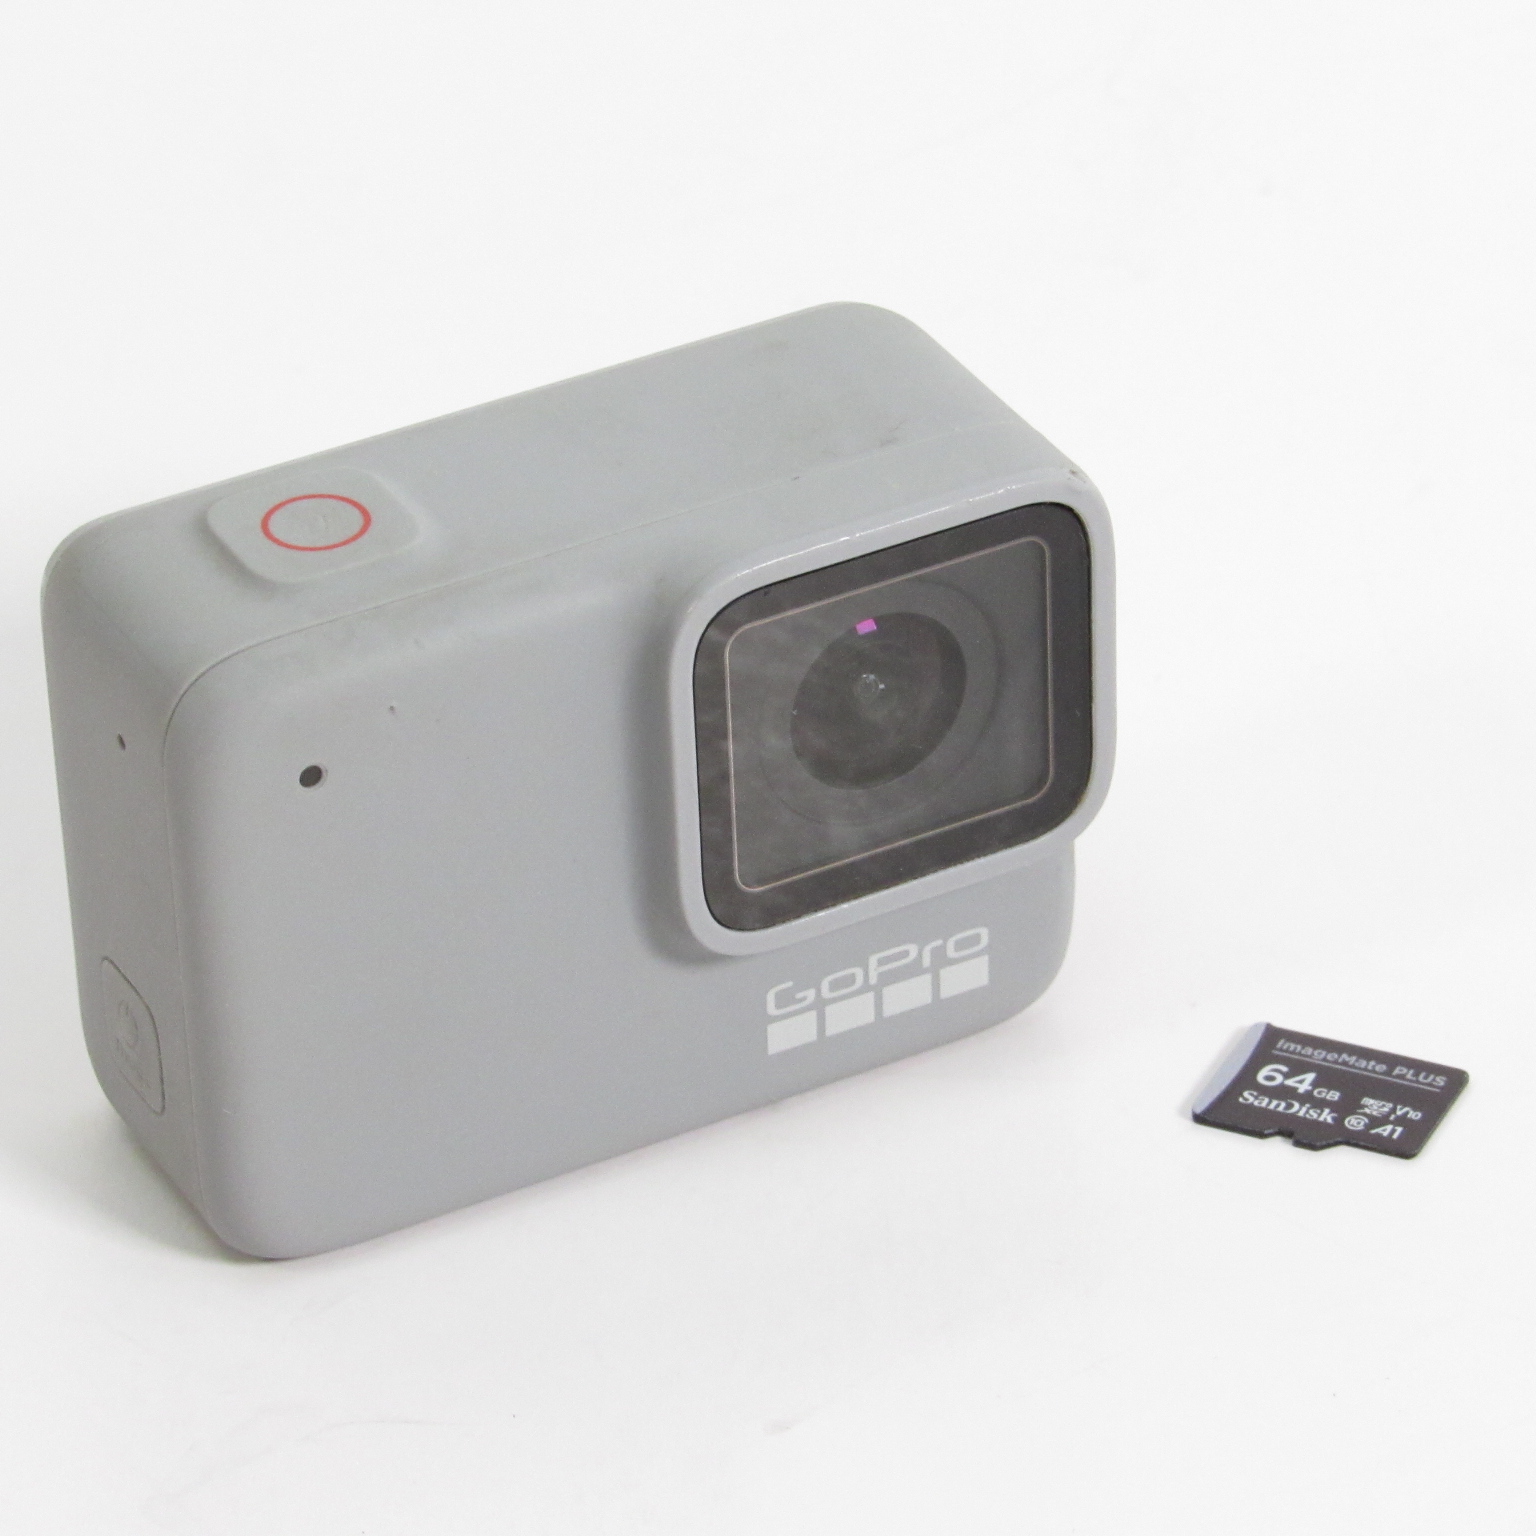  GoPro HERO7 White - E-Commerce Packaging - Waterproof Digital  Action Camera with Touch Screen 1080p Video 10MP Photos Stabilization :  Electronics